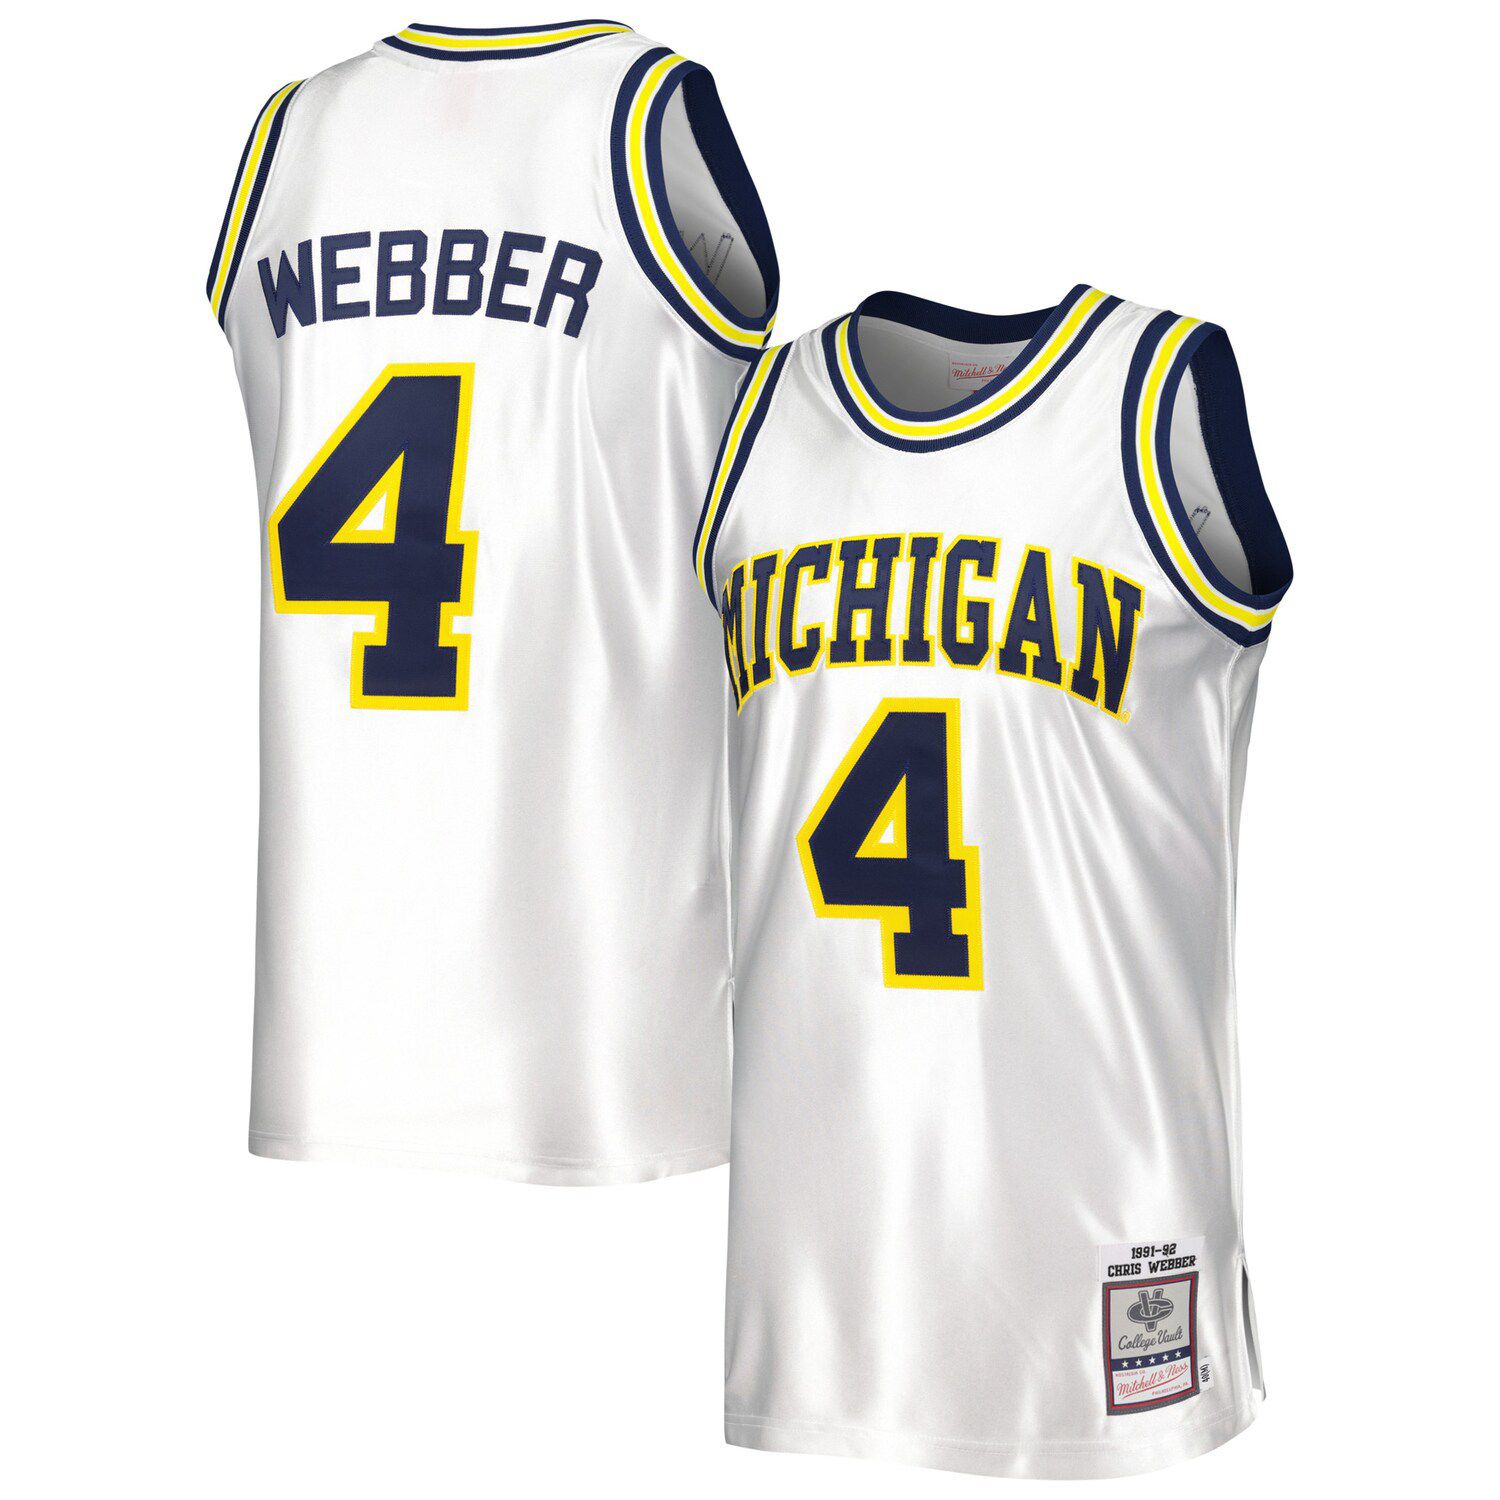 12-18 month michigan wolverines baby apparel jersey